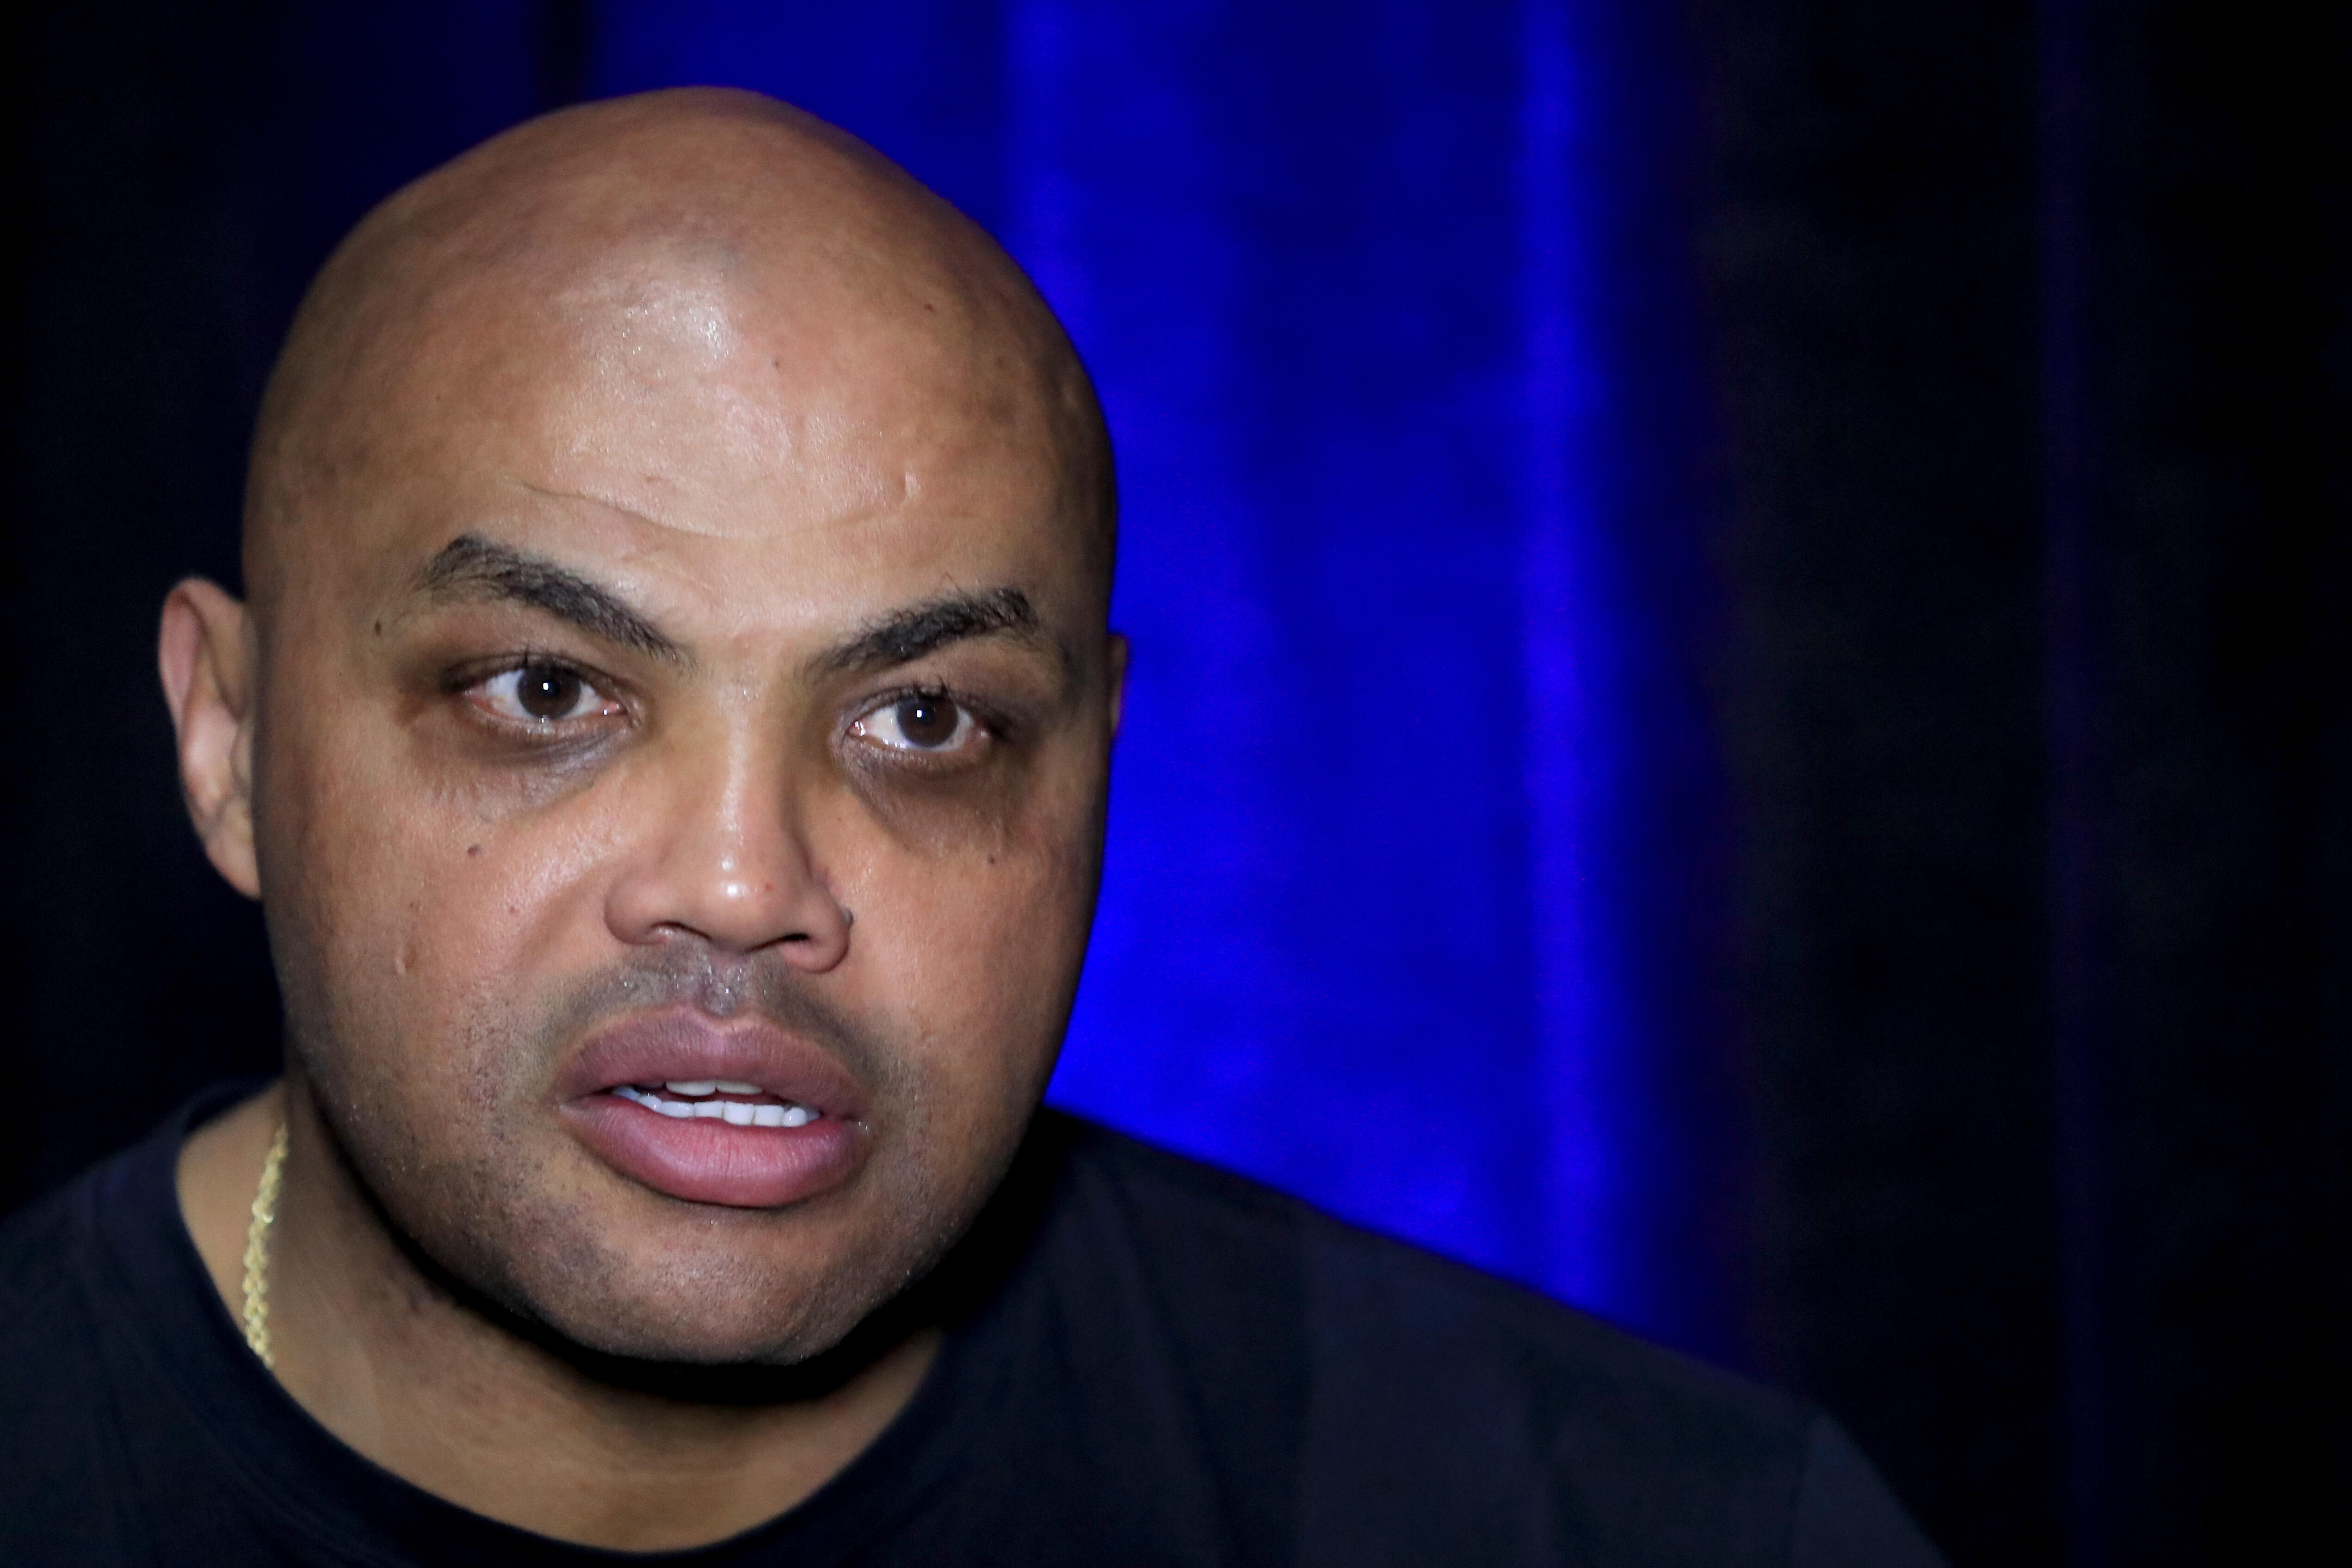 HOUSTON, TEXAS - APRIL 01:  Former NBA player and TNT commentator Charles Barkley is interviewed during a practice session for the 2016 NCAA Men's Final Four at NRG Stadium on April 1, 2016 in Houston, Texas.  (Photo by Ronald Martinez/Getty Images)